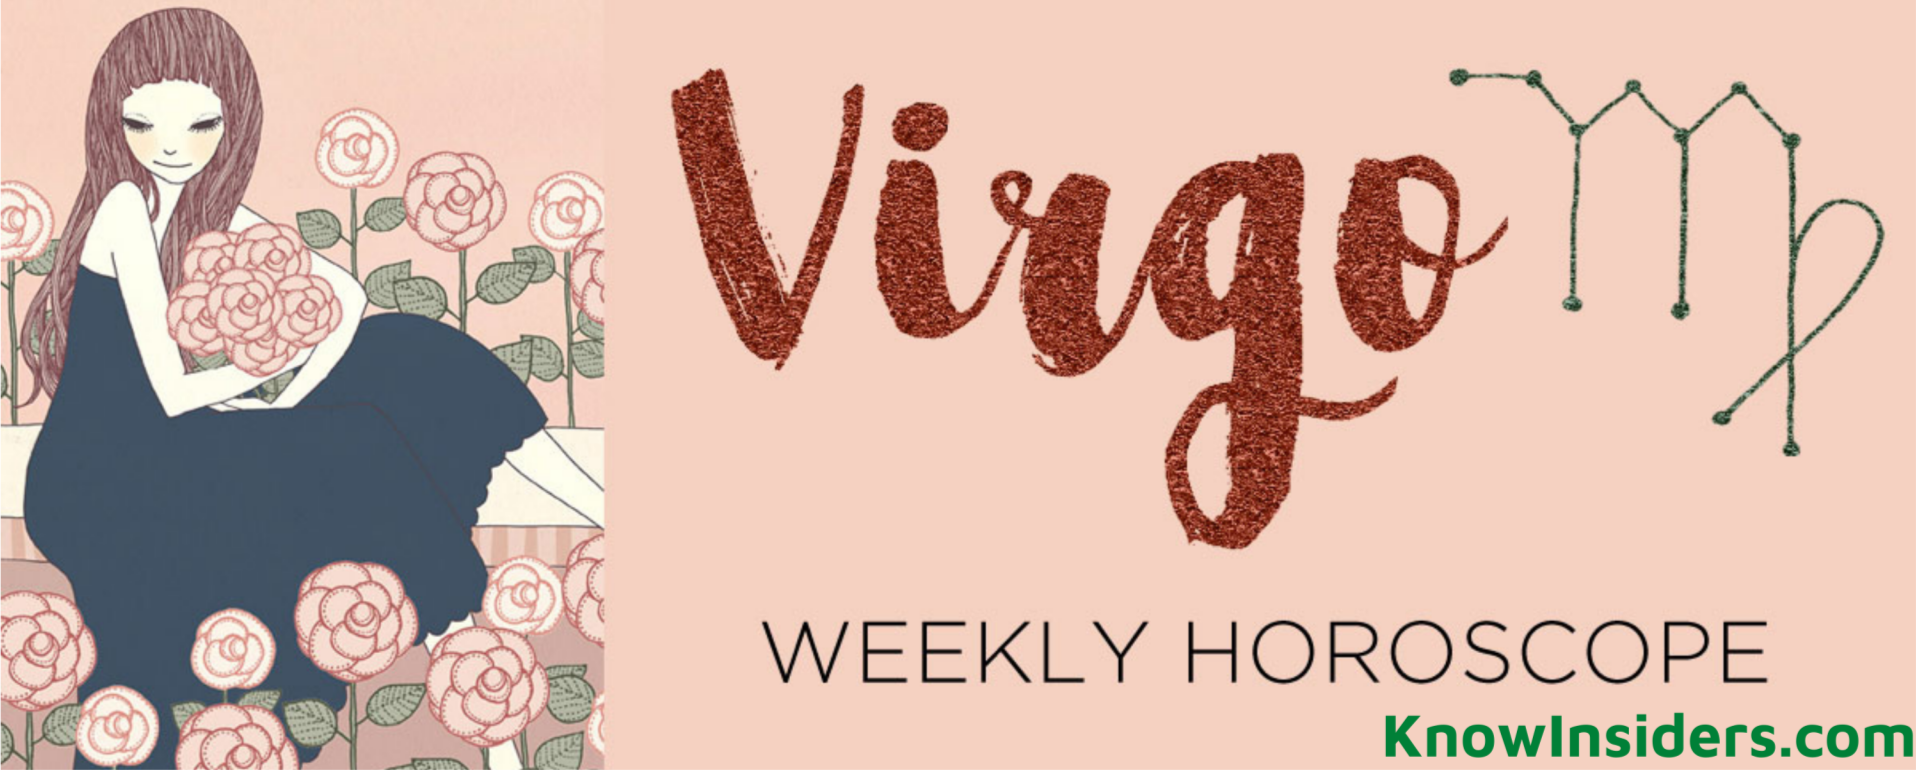 VIRGO Weekly Horoscope (April 19-25): Astrological Predictions for Love, Financial, Career and Health